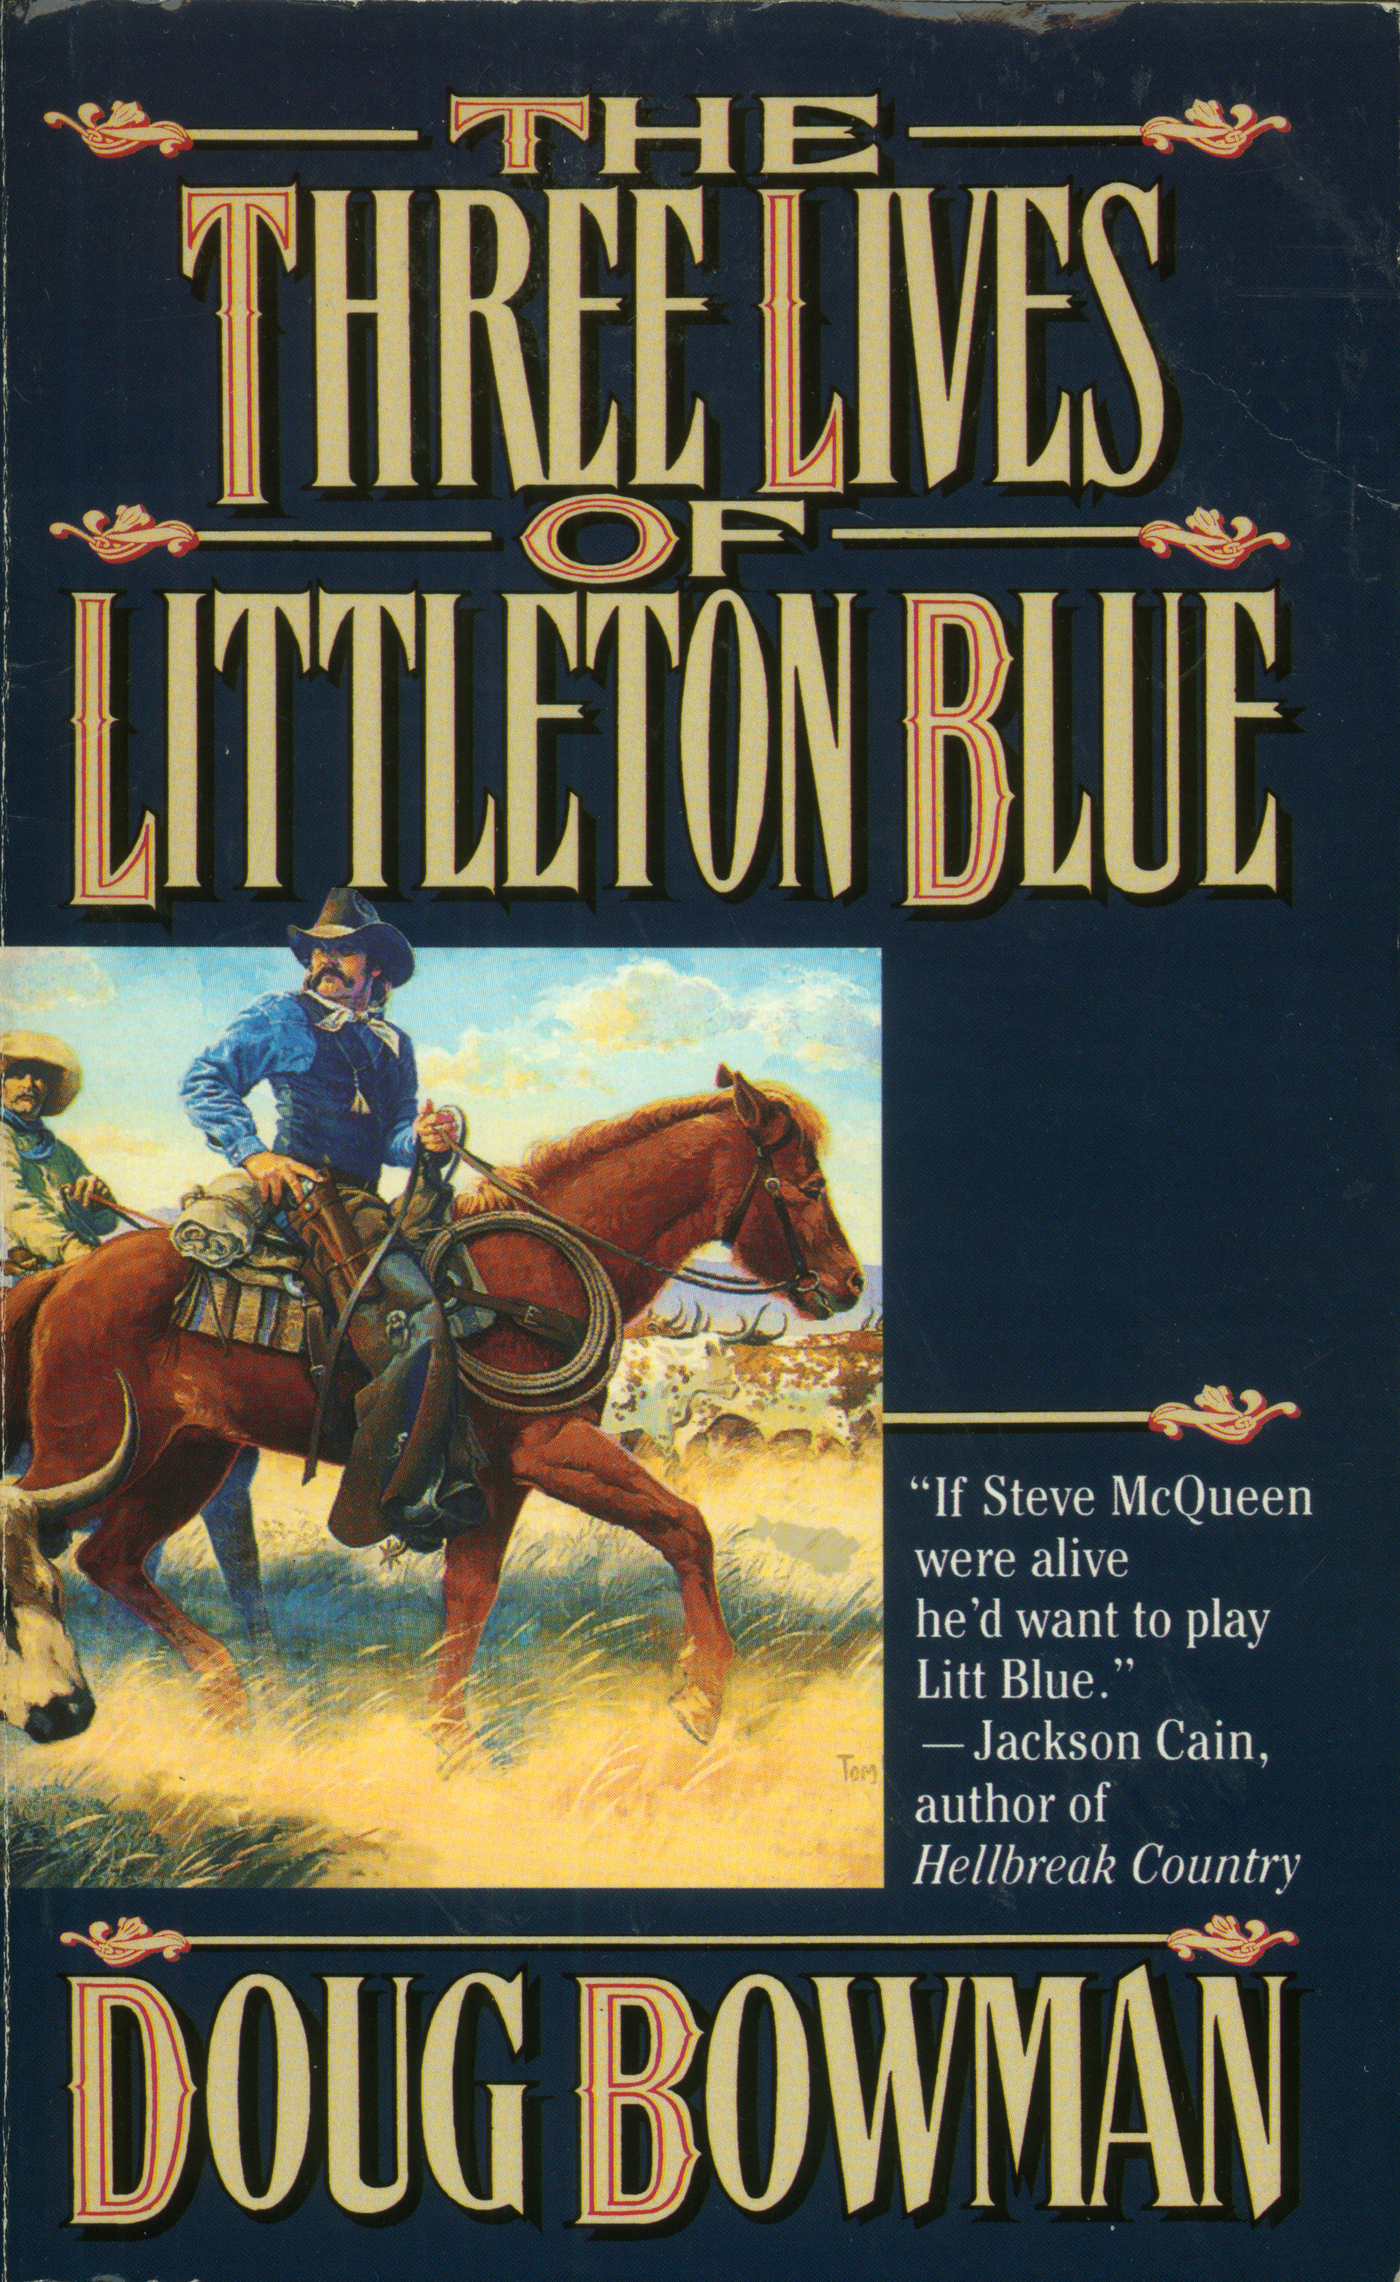 The Three Lives of Littleton Blue by Doug Bowman